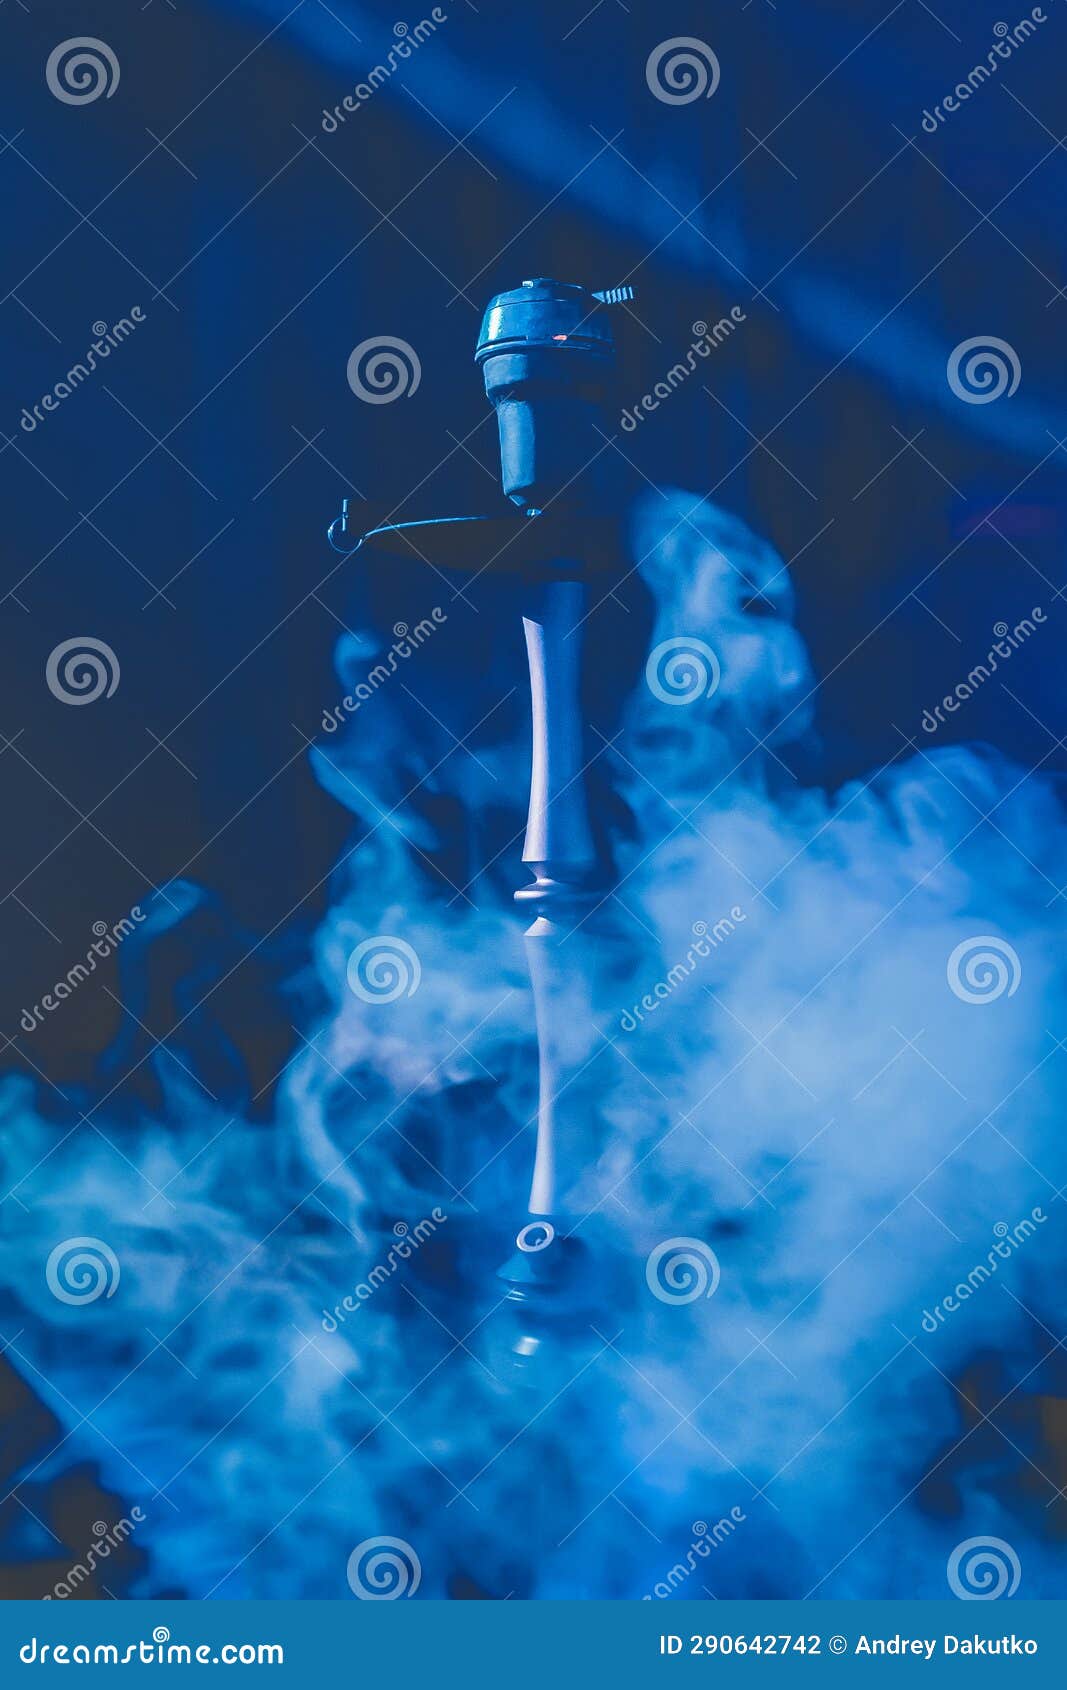 Hookah Head, Clay Bowl and Pipe, Smoking Object in Smoke and Blue